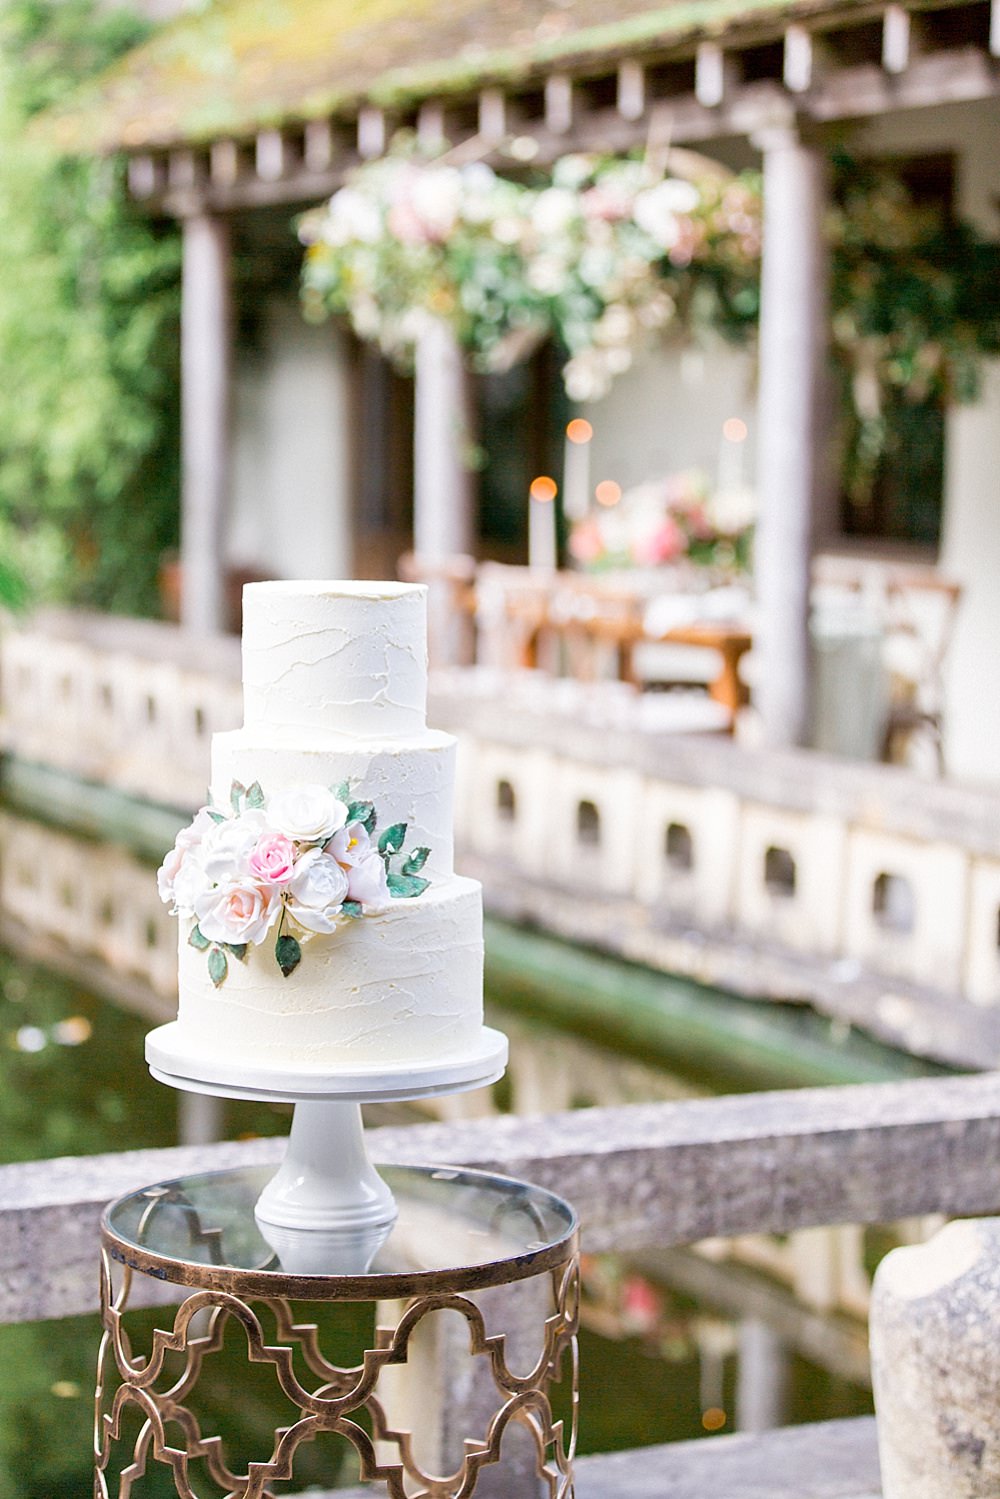 The wedding cake was a textural one, with lush blooms and greenery to fit the shoot theme